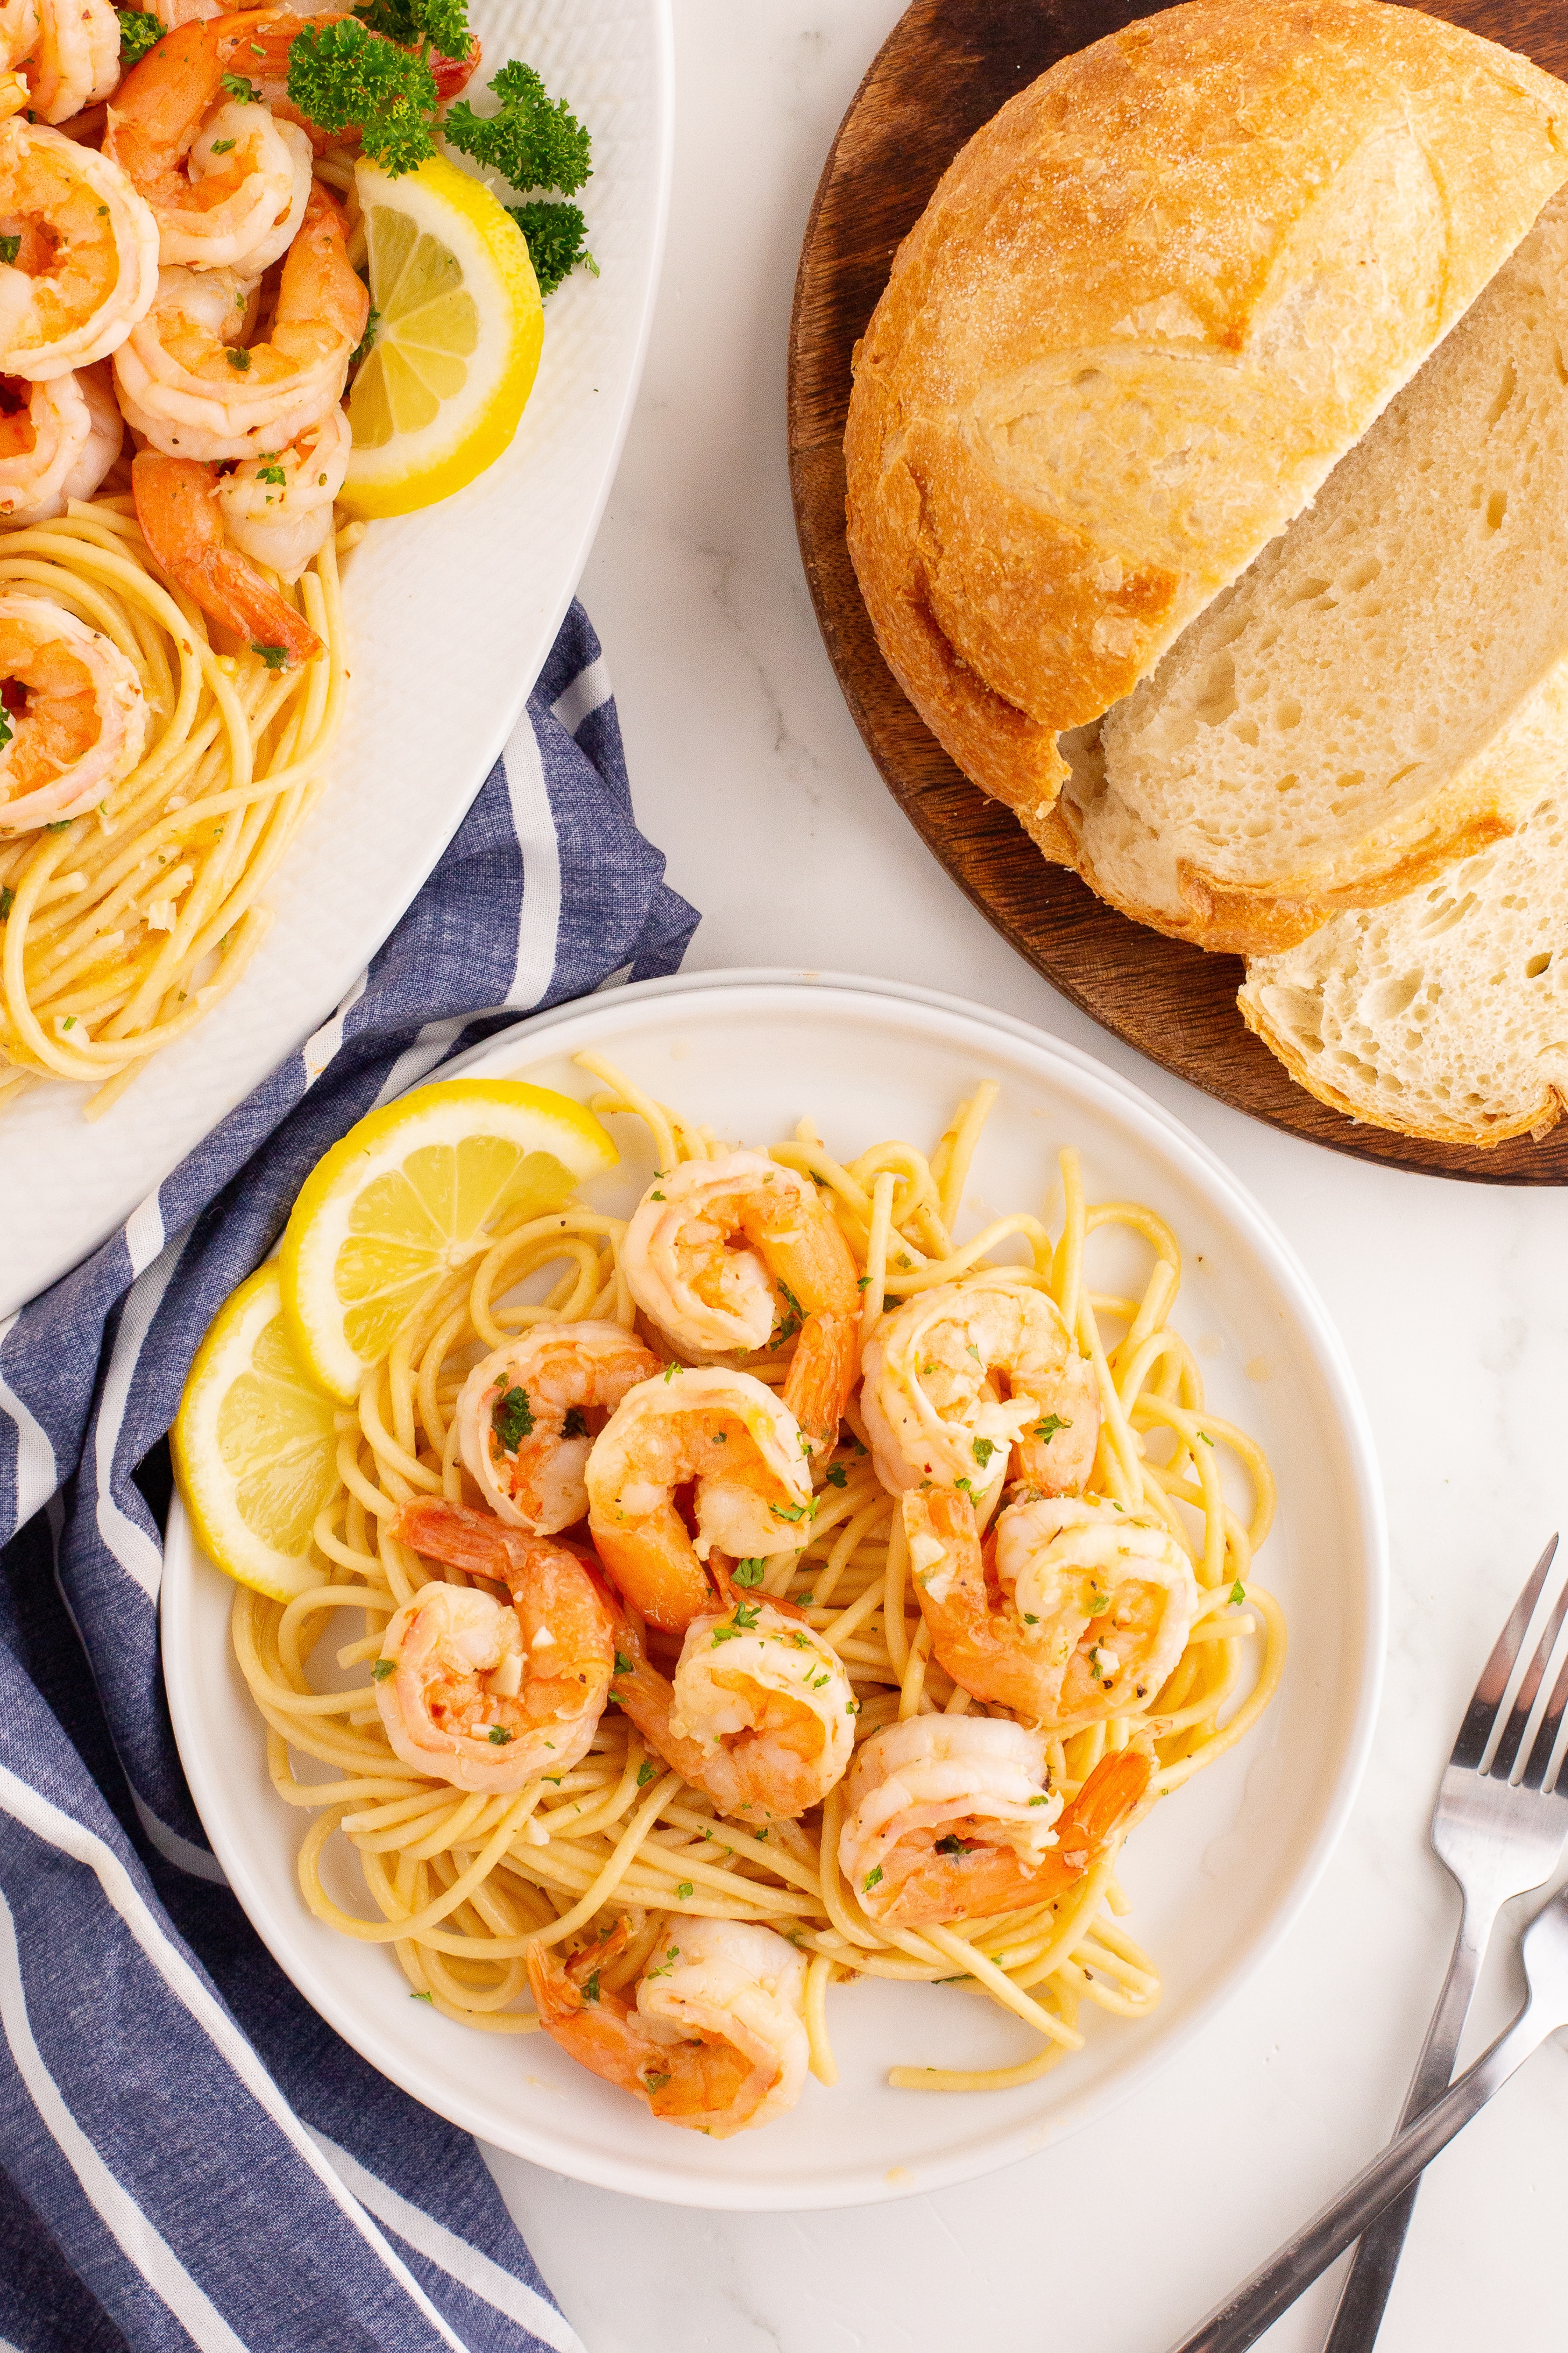 Shrimp pasta on plates next to a loaf of crusty bread.